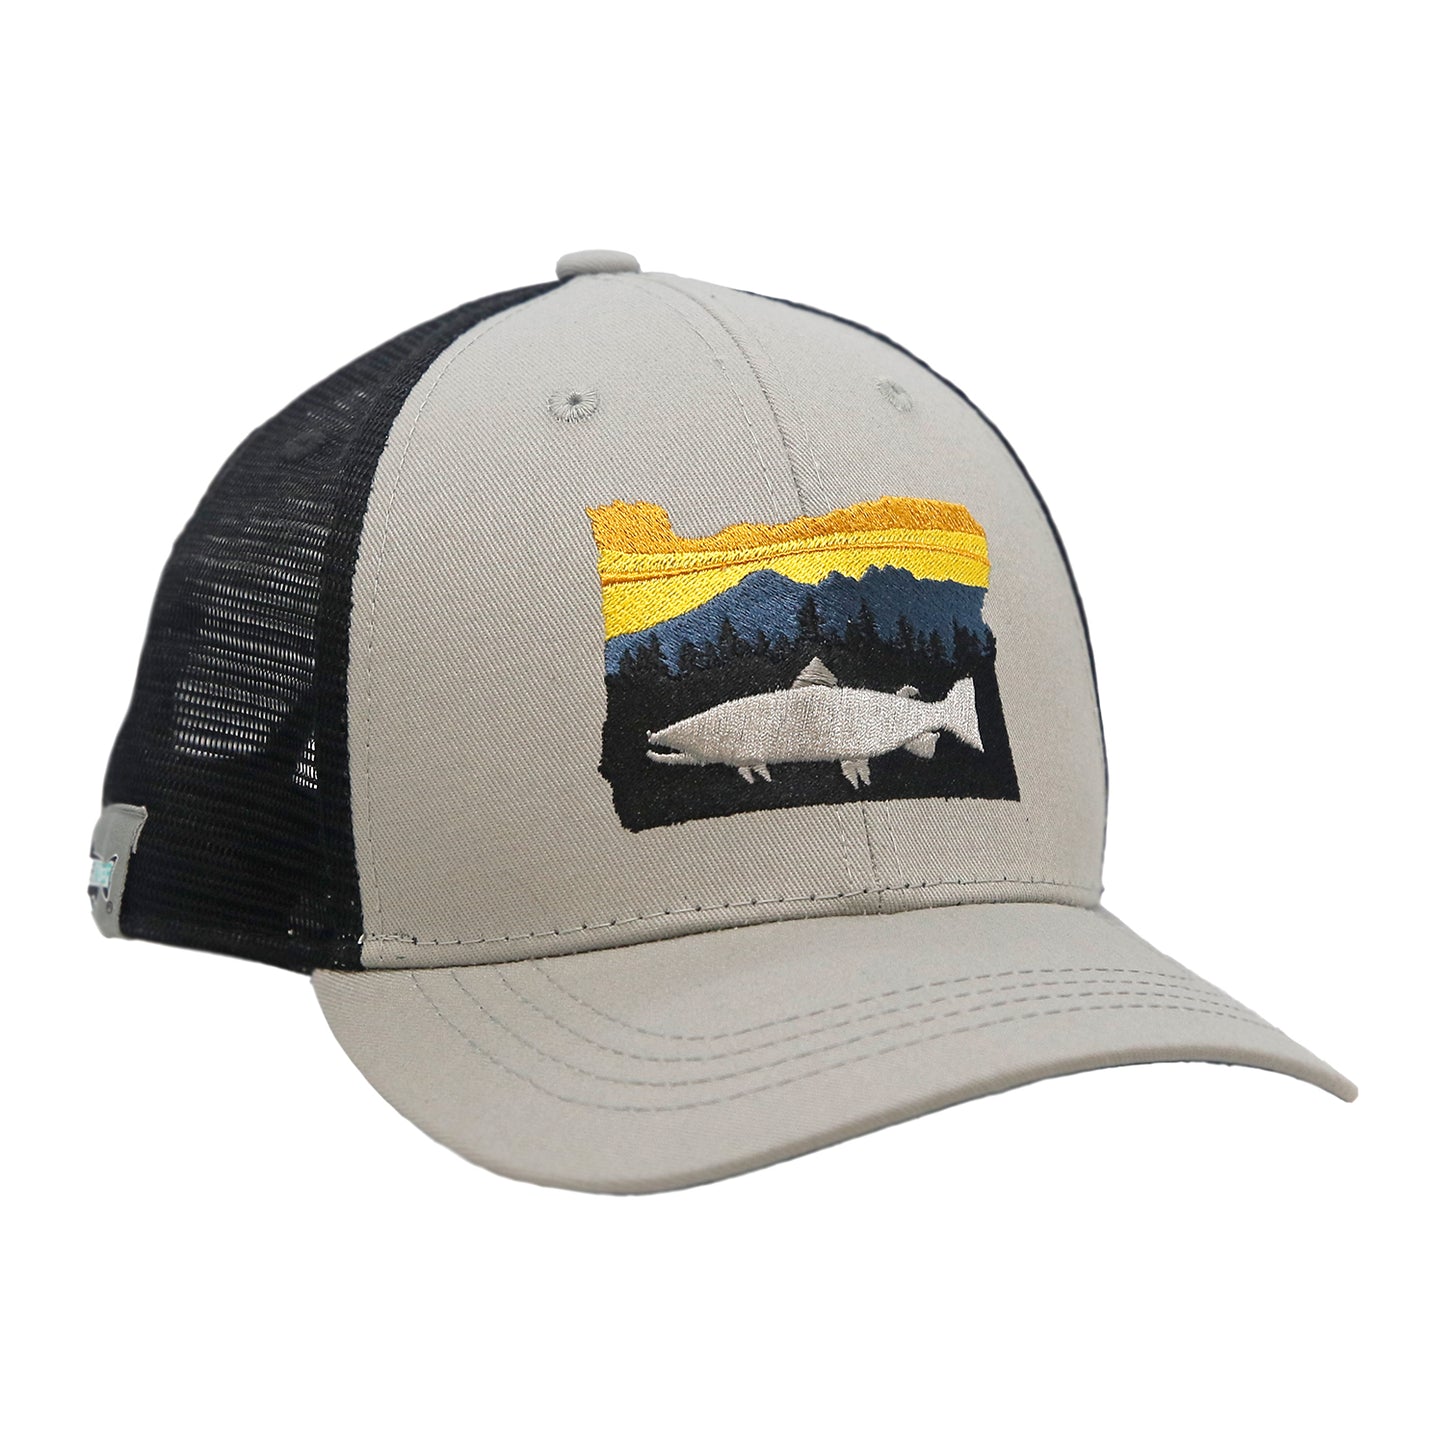 A hat with black mesh in back and gray fabric in front has embroidery in the shape of oregon stsate with a trout in front of trees mountains and a sunset